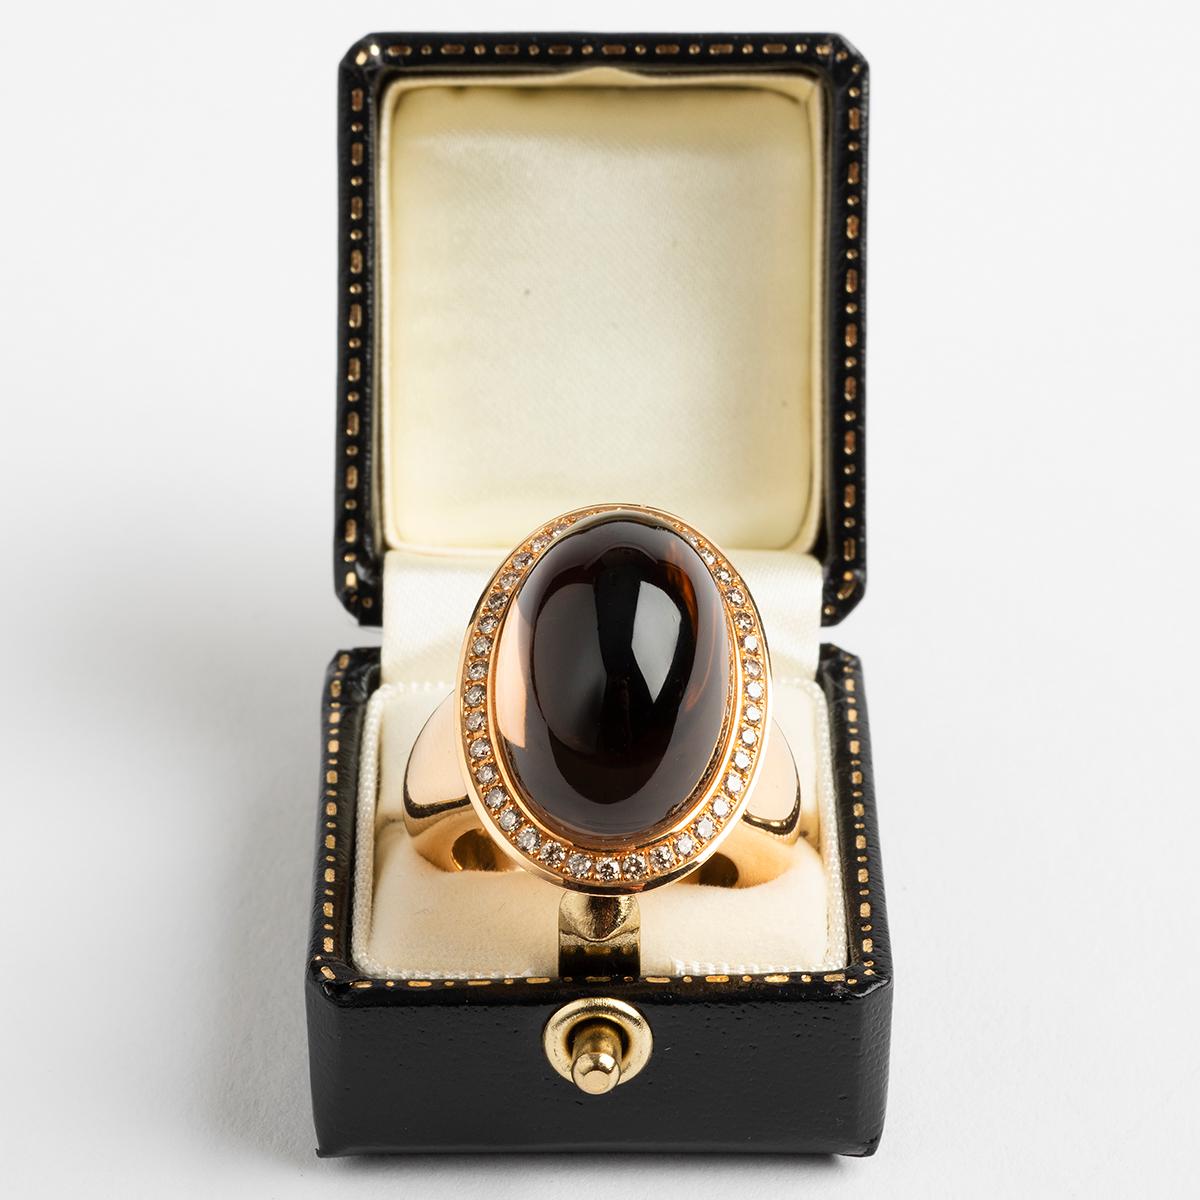 Our rare and large 18k yellow gold dress ring features a phenomenal and noteworthy smokey quartz of considerable dimension, as well as a diamond clad setting. This ring size is O1/2. A unique statement piece for the discerning collector.